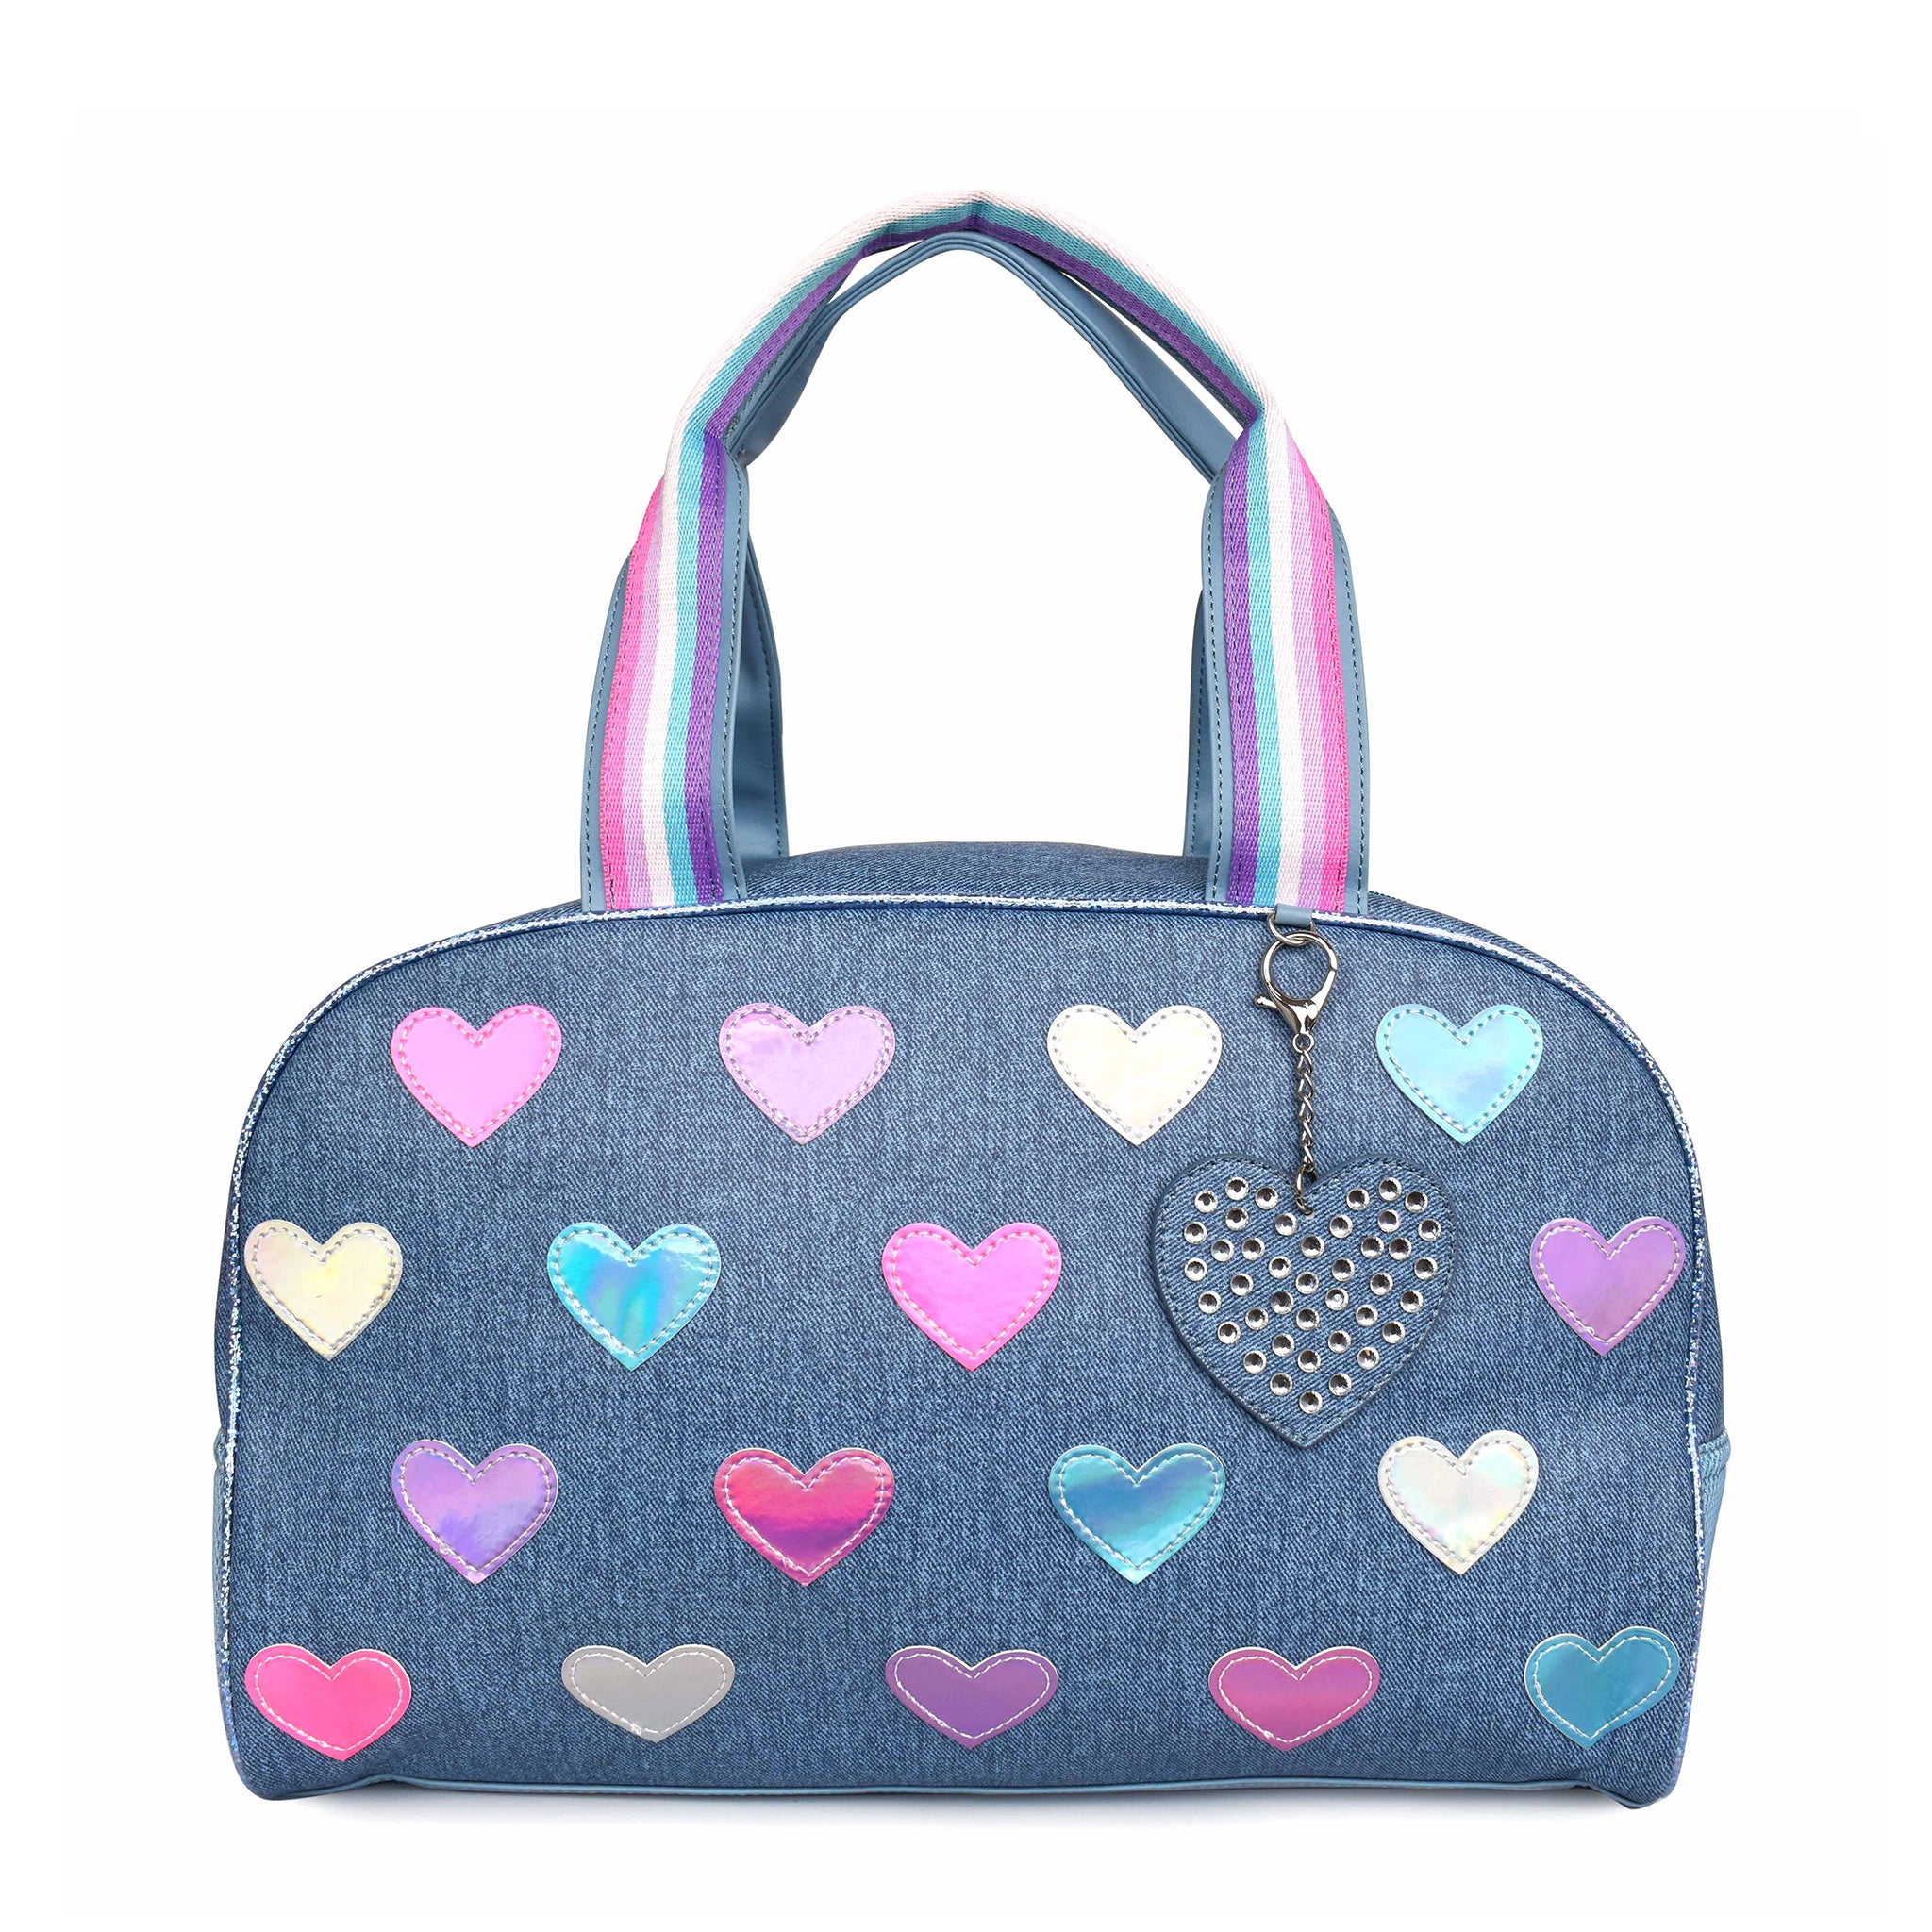 Front view of denim-printed medium duffle bag with reflective heart patches and heart-shaped keychain